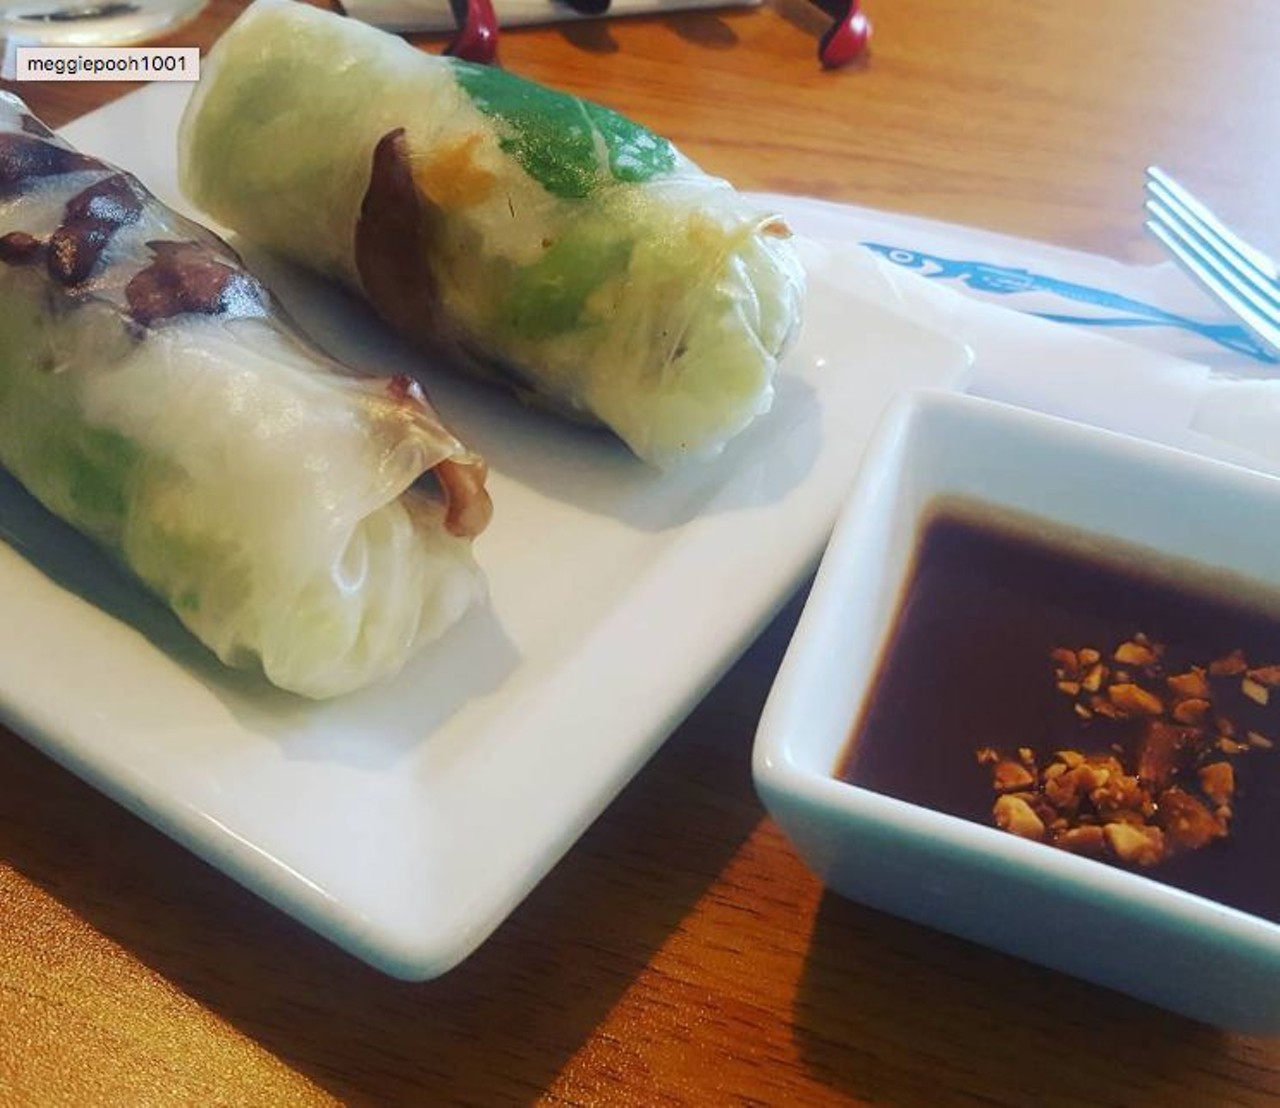 Pho and Roll
Because who needs rock, anyway? Pho and Roll&#146;s menu includes a tasteful variety of Vietnamese favorites, as well as a good number of vegetarian items. Try its Summer Rolls and Egg Rolls, both for under $5.00. 
Photo via meggiepooh1001